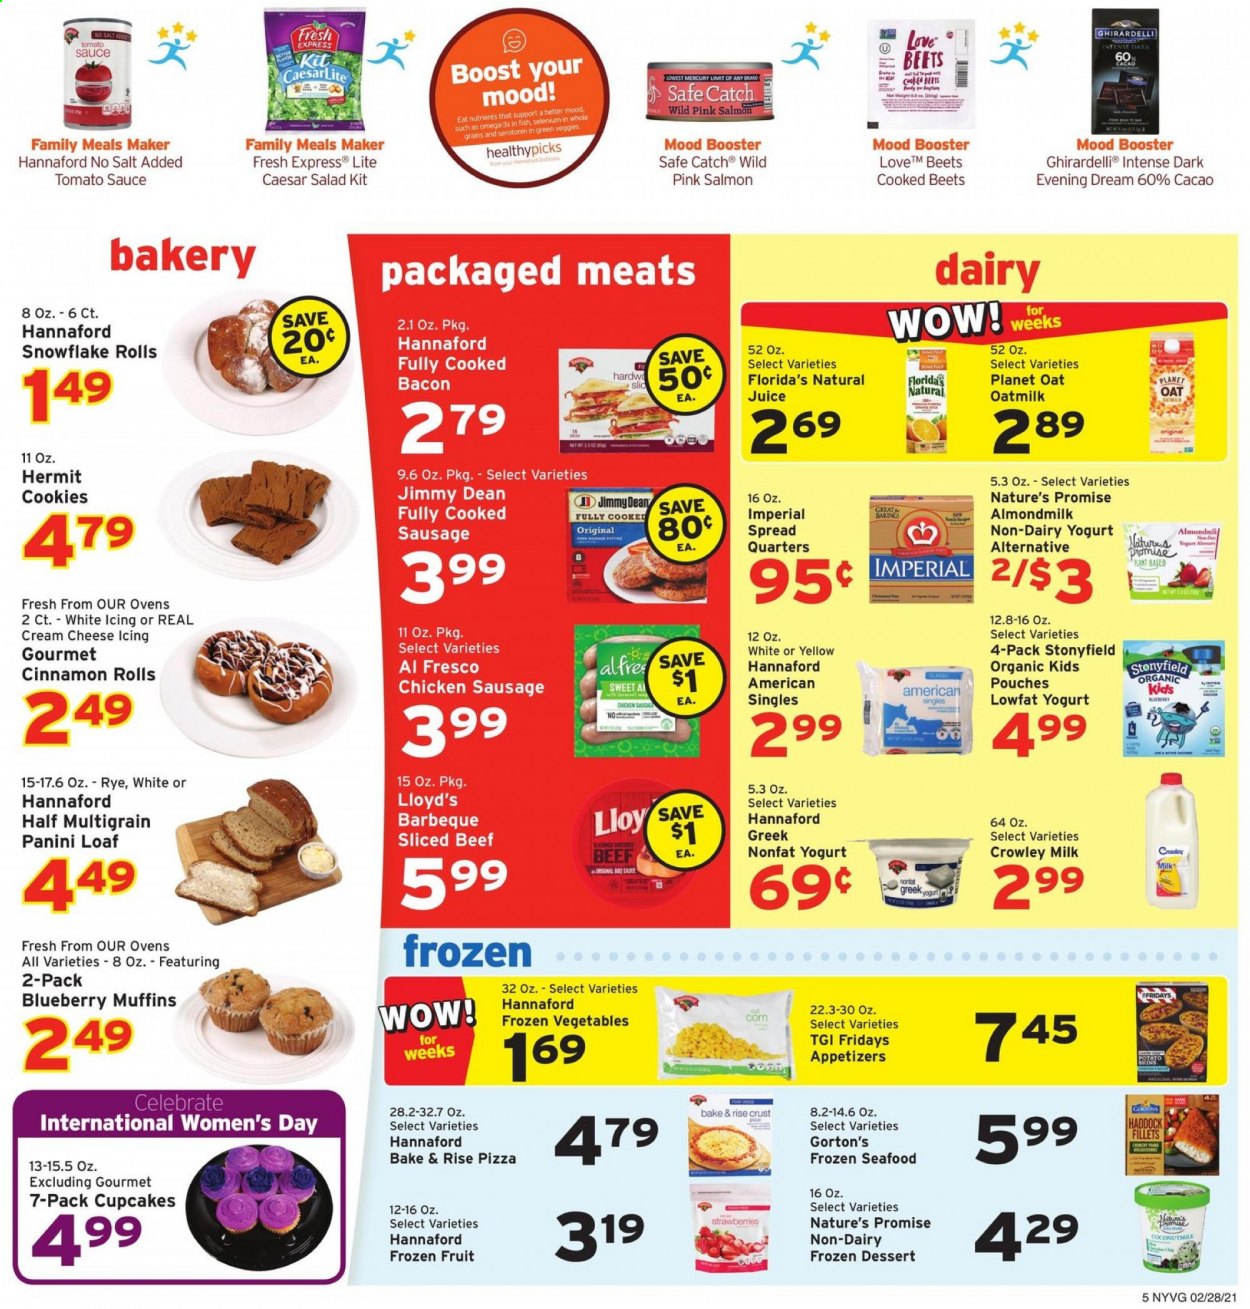 thumbnail - Hannaford Flyer - 02/28/2021 - 03/06/2021 - Sales products - panini, Nature’s Promise, cinnamon roll, cupcake, muffin, salmon, haddock, seafood, fish, Gorton's, cream cheese, pizza, salad, sauce, Jimmy Dean, sausage, chicken sausage, cheese, yoghurt, almond milk, milk, oat milk, corn, frozen vegetables, strawberries, cookies, Ghirardelli, Florida's Natural, oats, coconut milk, tomato sauce, juice, Boost. Page 5.